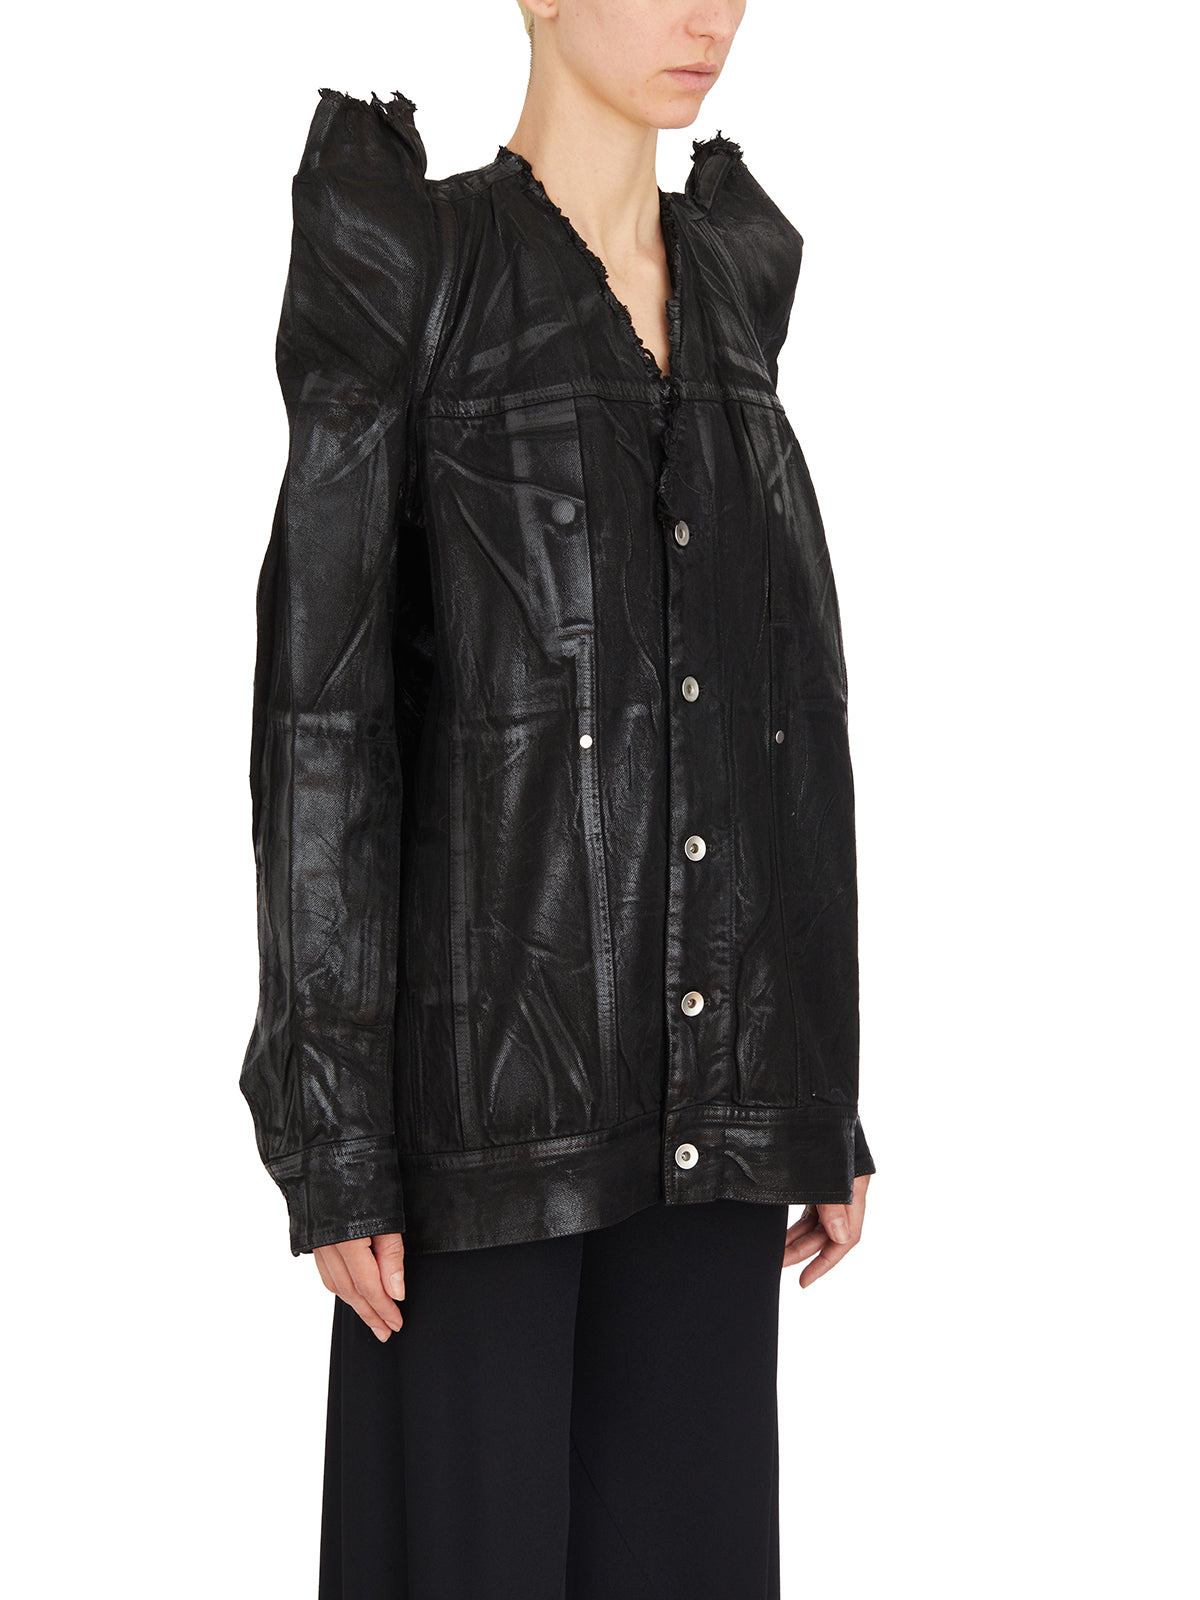 RICK OWENS Black Cotton Work Jacket with Wearable Lapels and Zippered Sleeves for Women